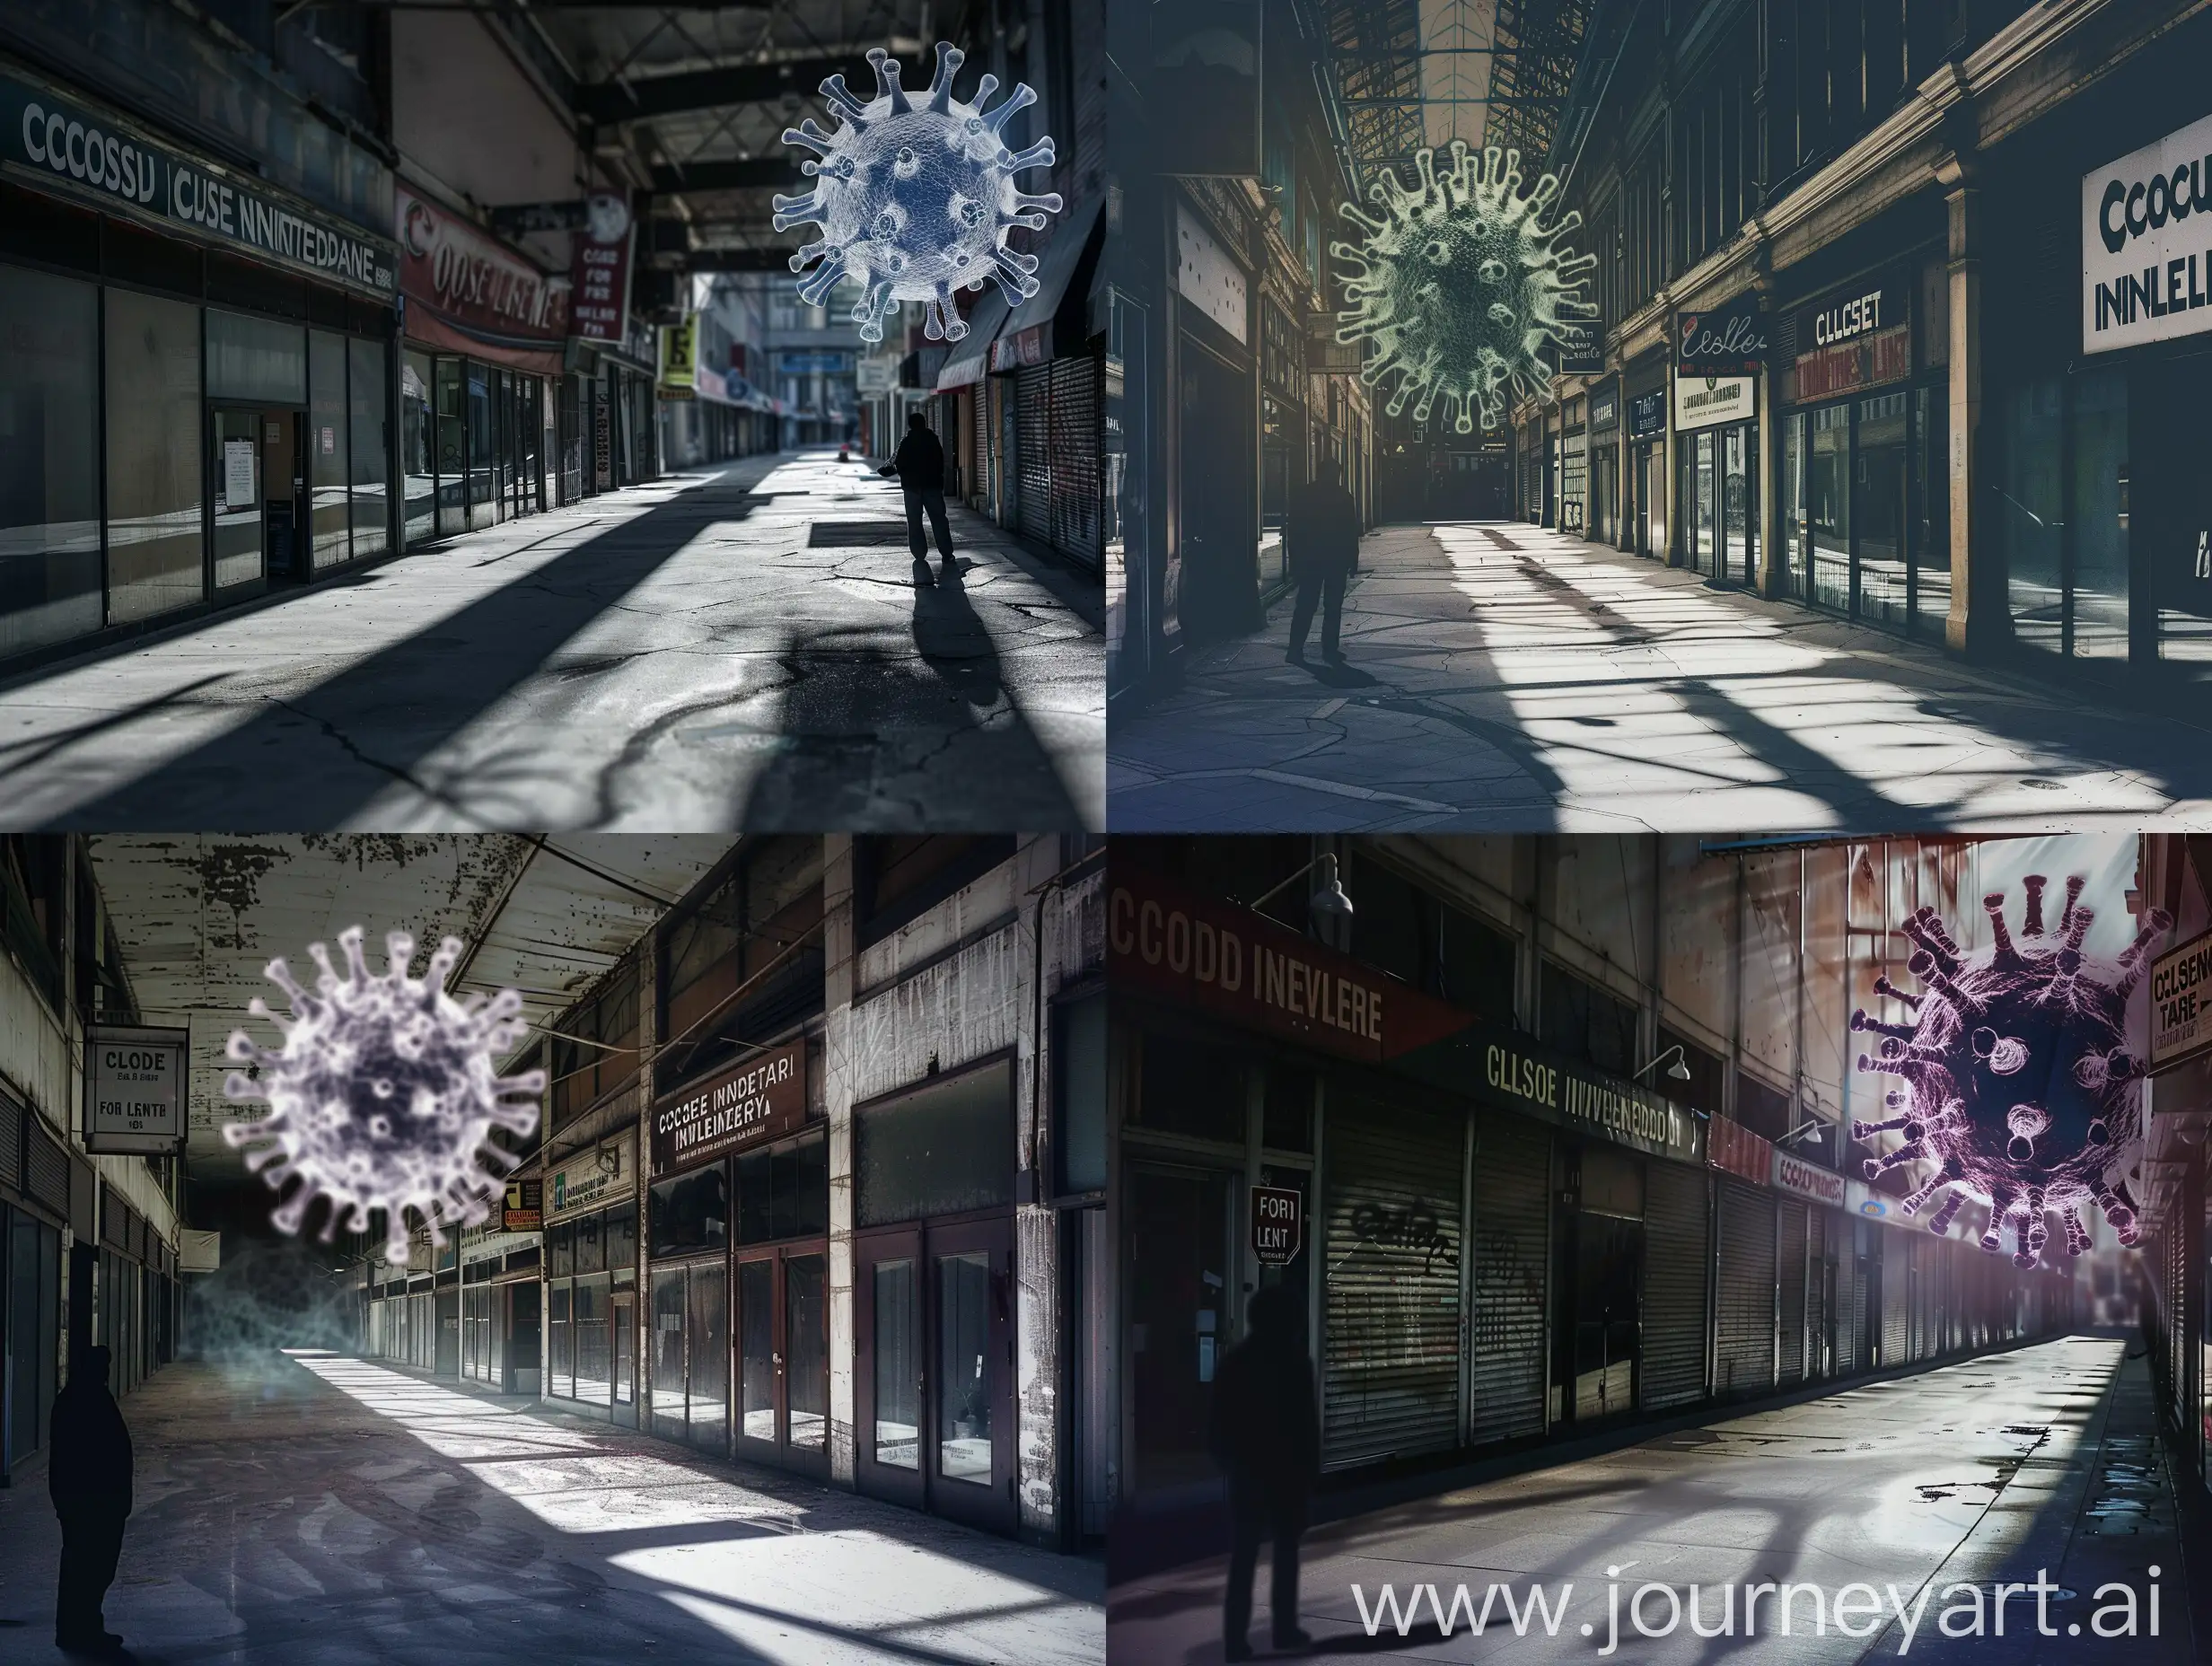 Deserted-Street-with-Closed-Storefronts-and-Lone-Figure-Amid-Uncertainty